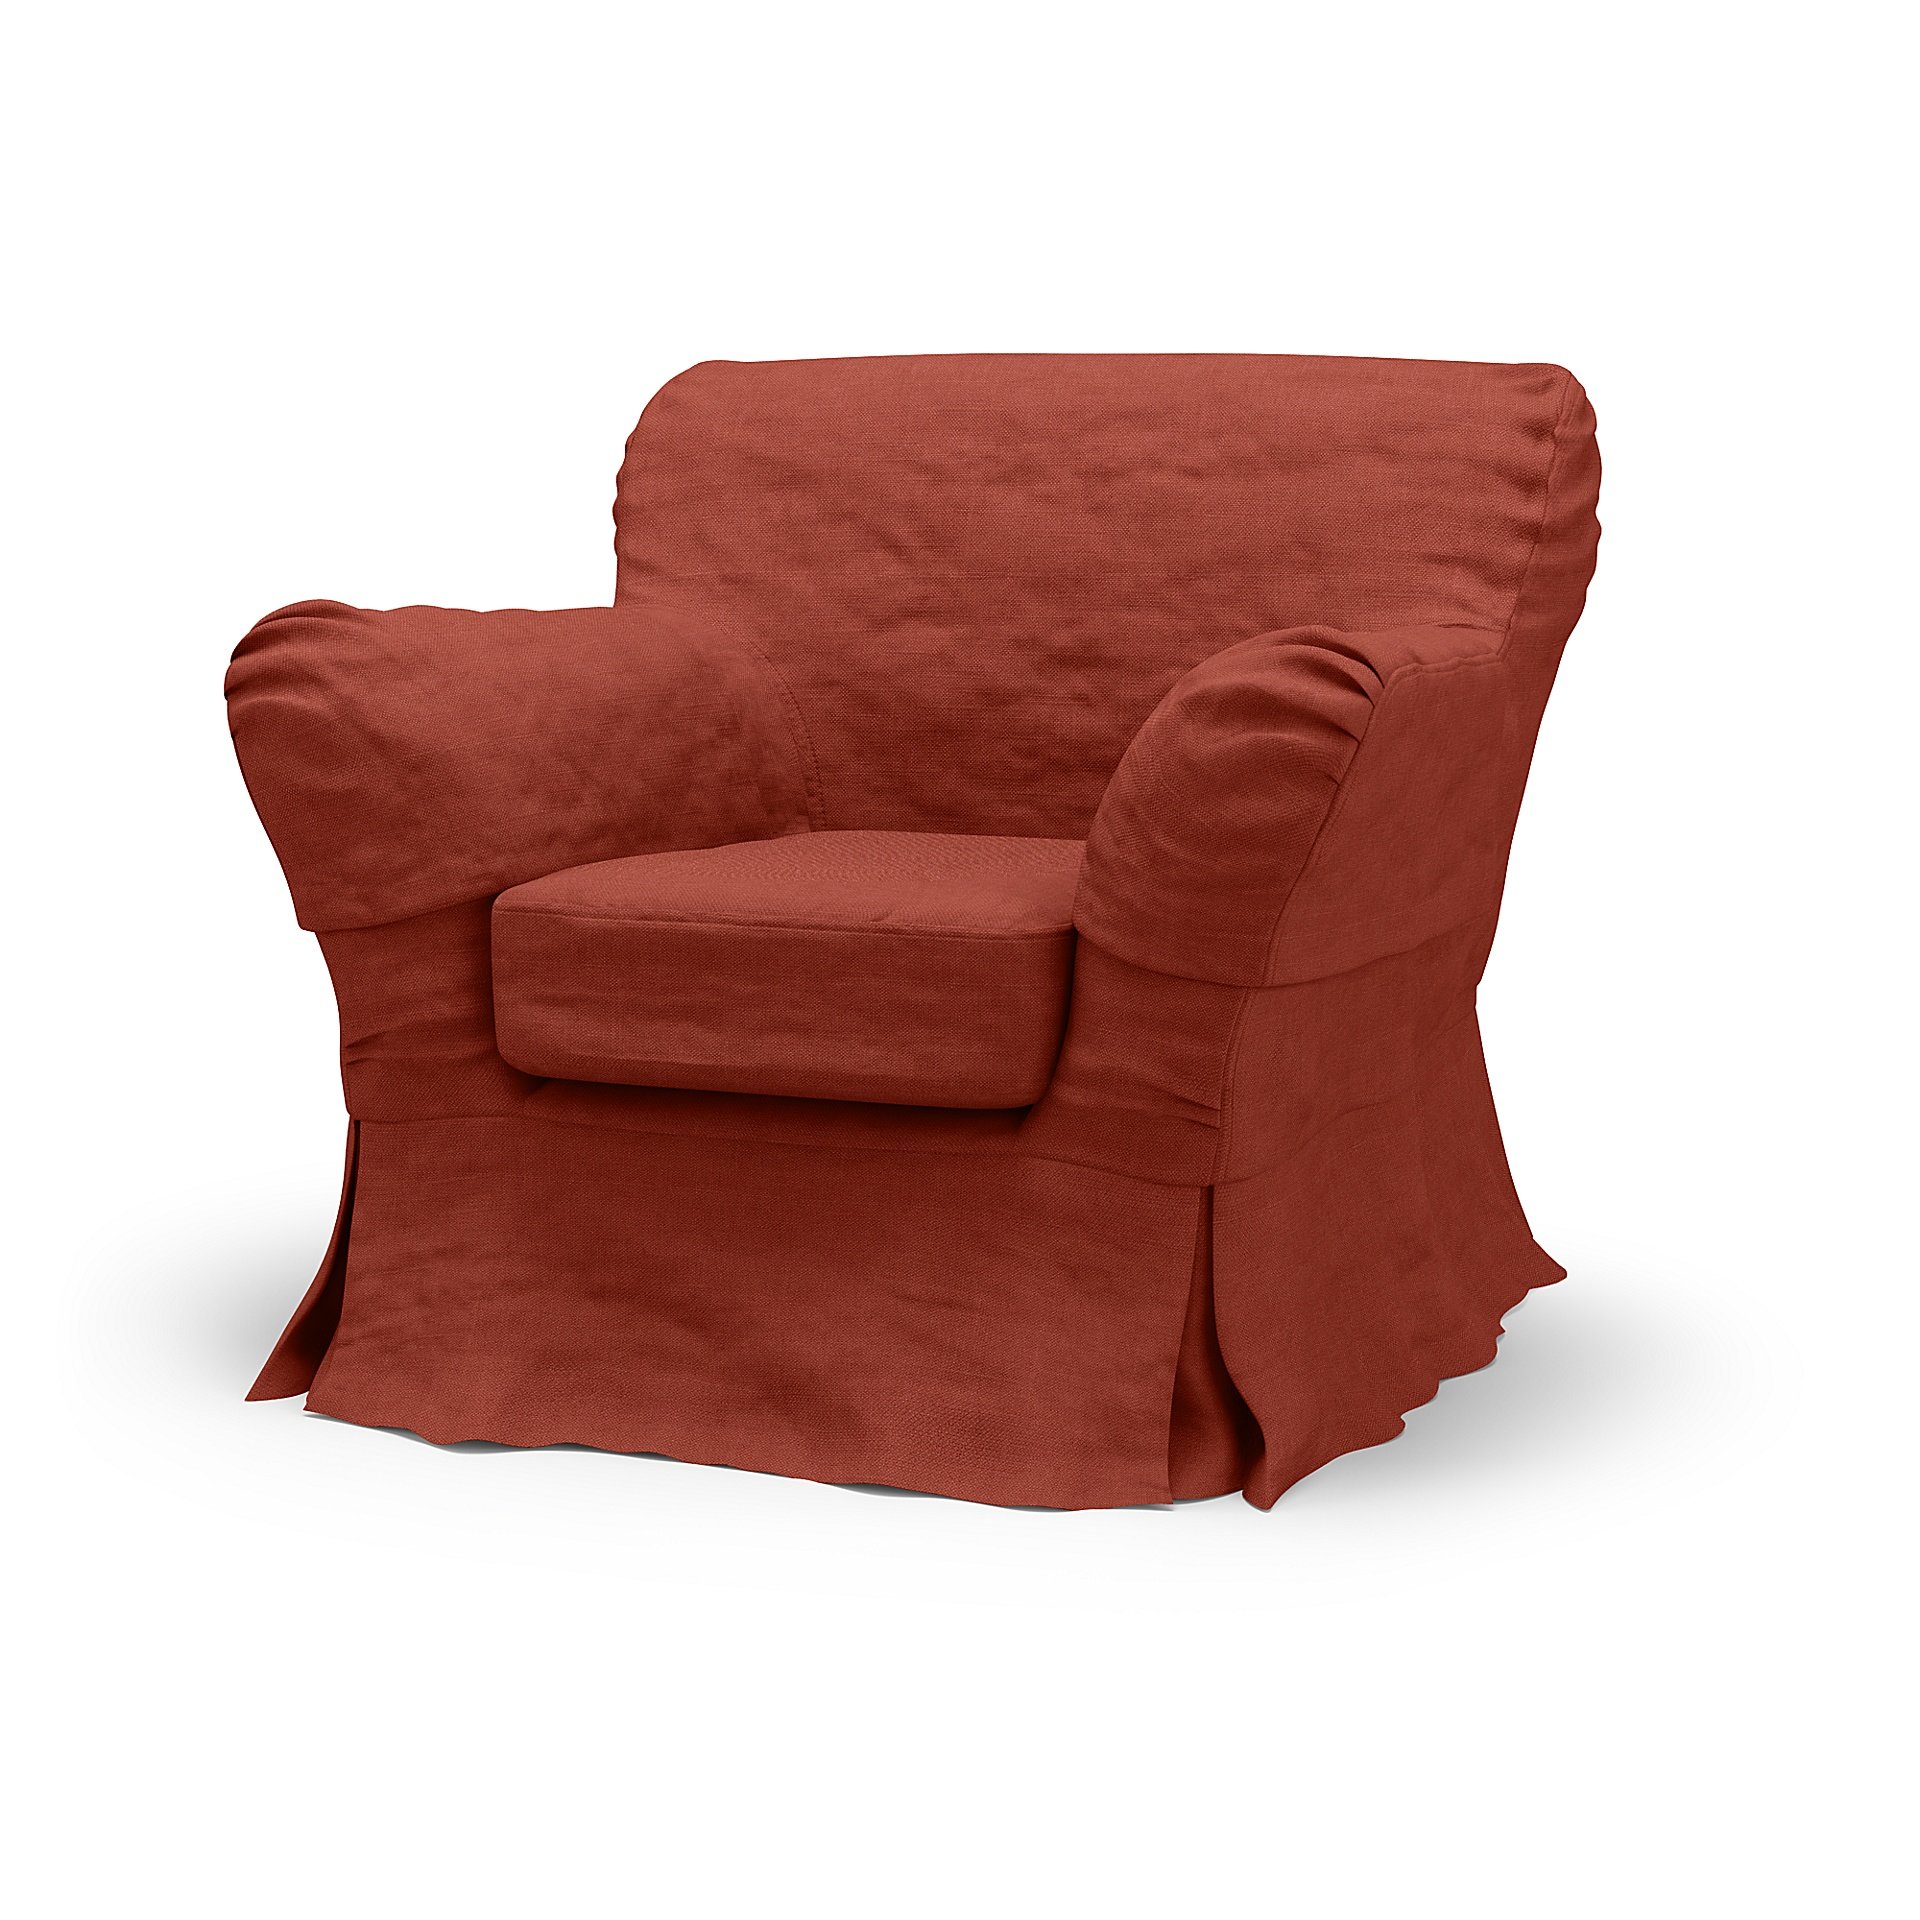 IKEA - Tomelilla Low Back Armchair Cover (Large), Cayenne, Linen - Bemz